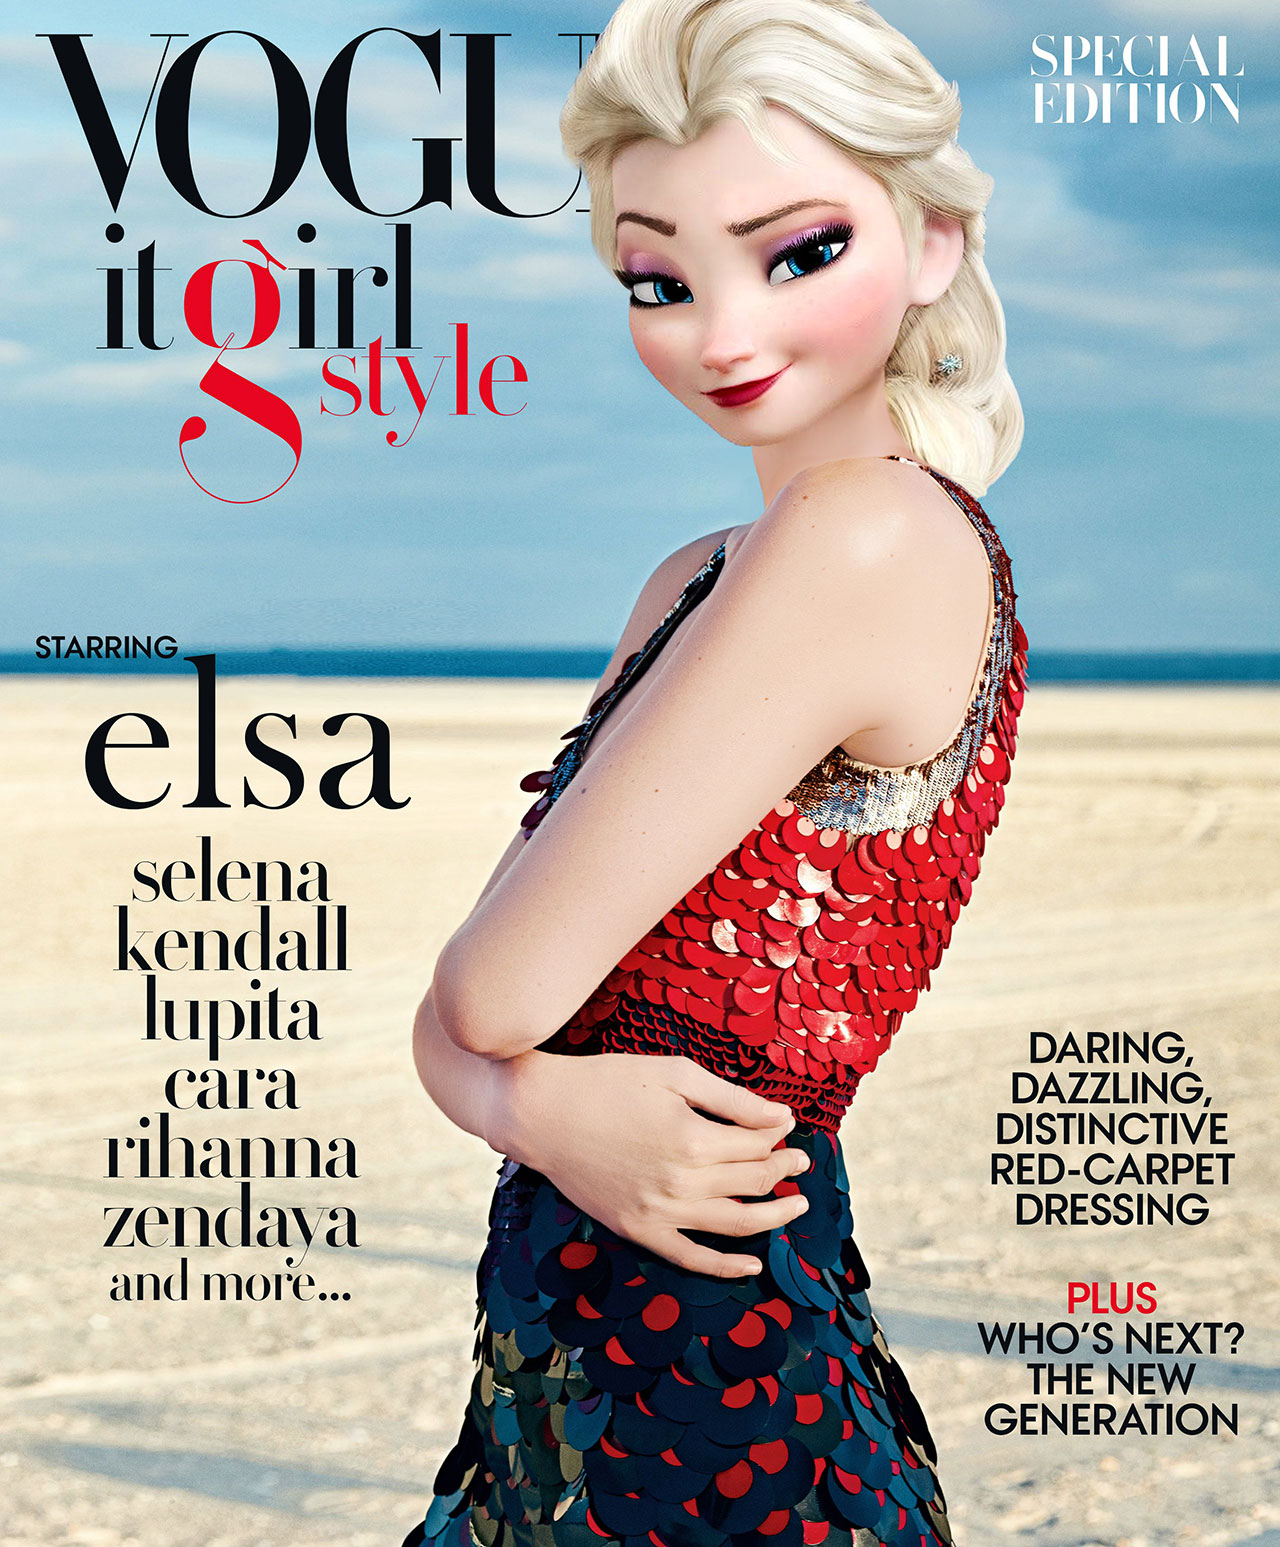 Gigi Hadid as Elsa from the cover of Vogue Magazine It-girl style special edition issue. Photographed by Gregory Harris, styled by Sara Moonves, photo edit by Gregory Masouras.